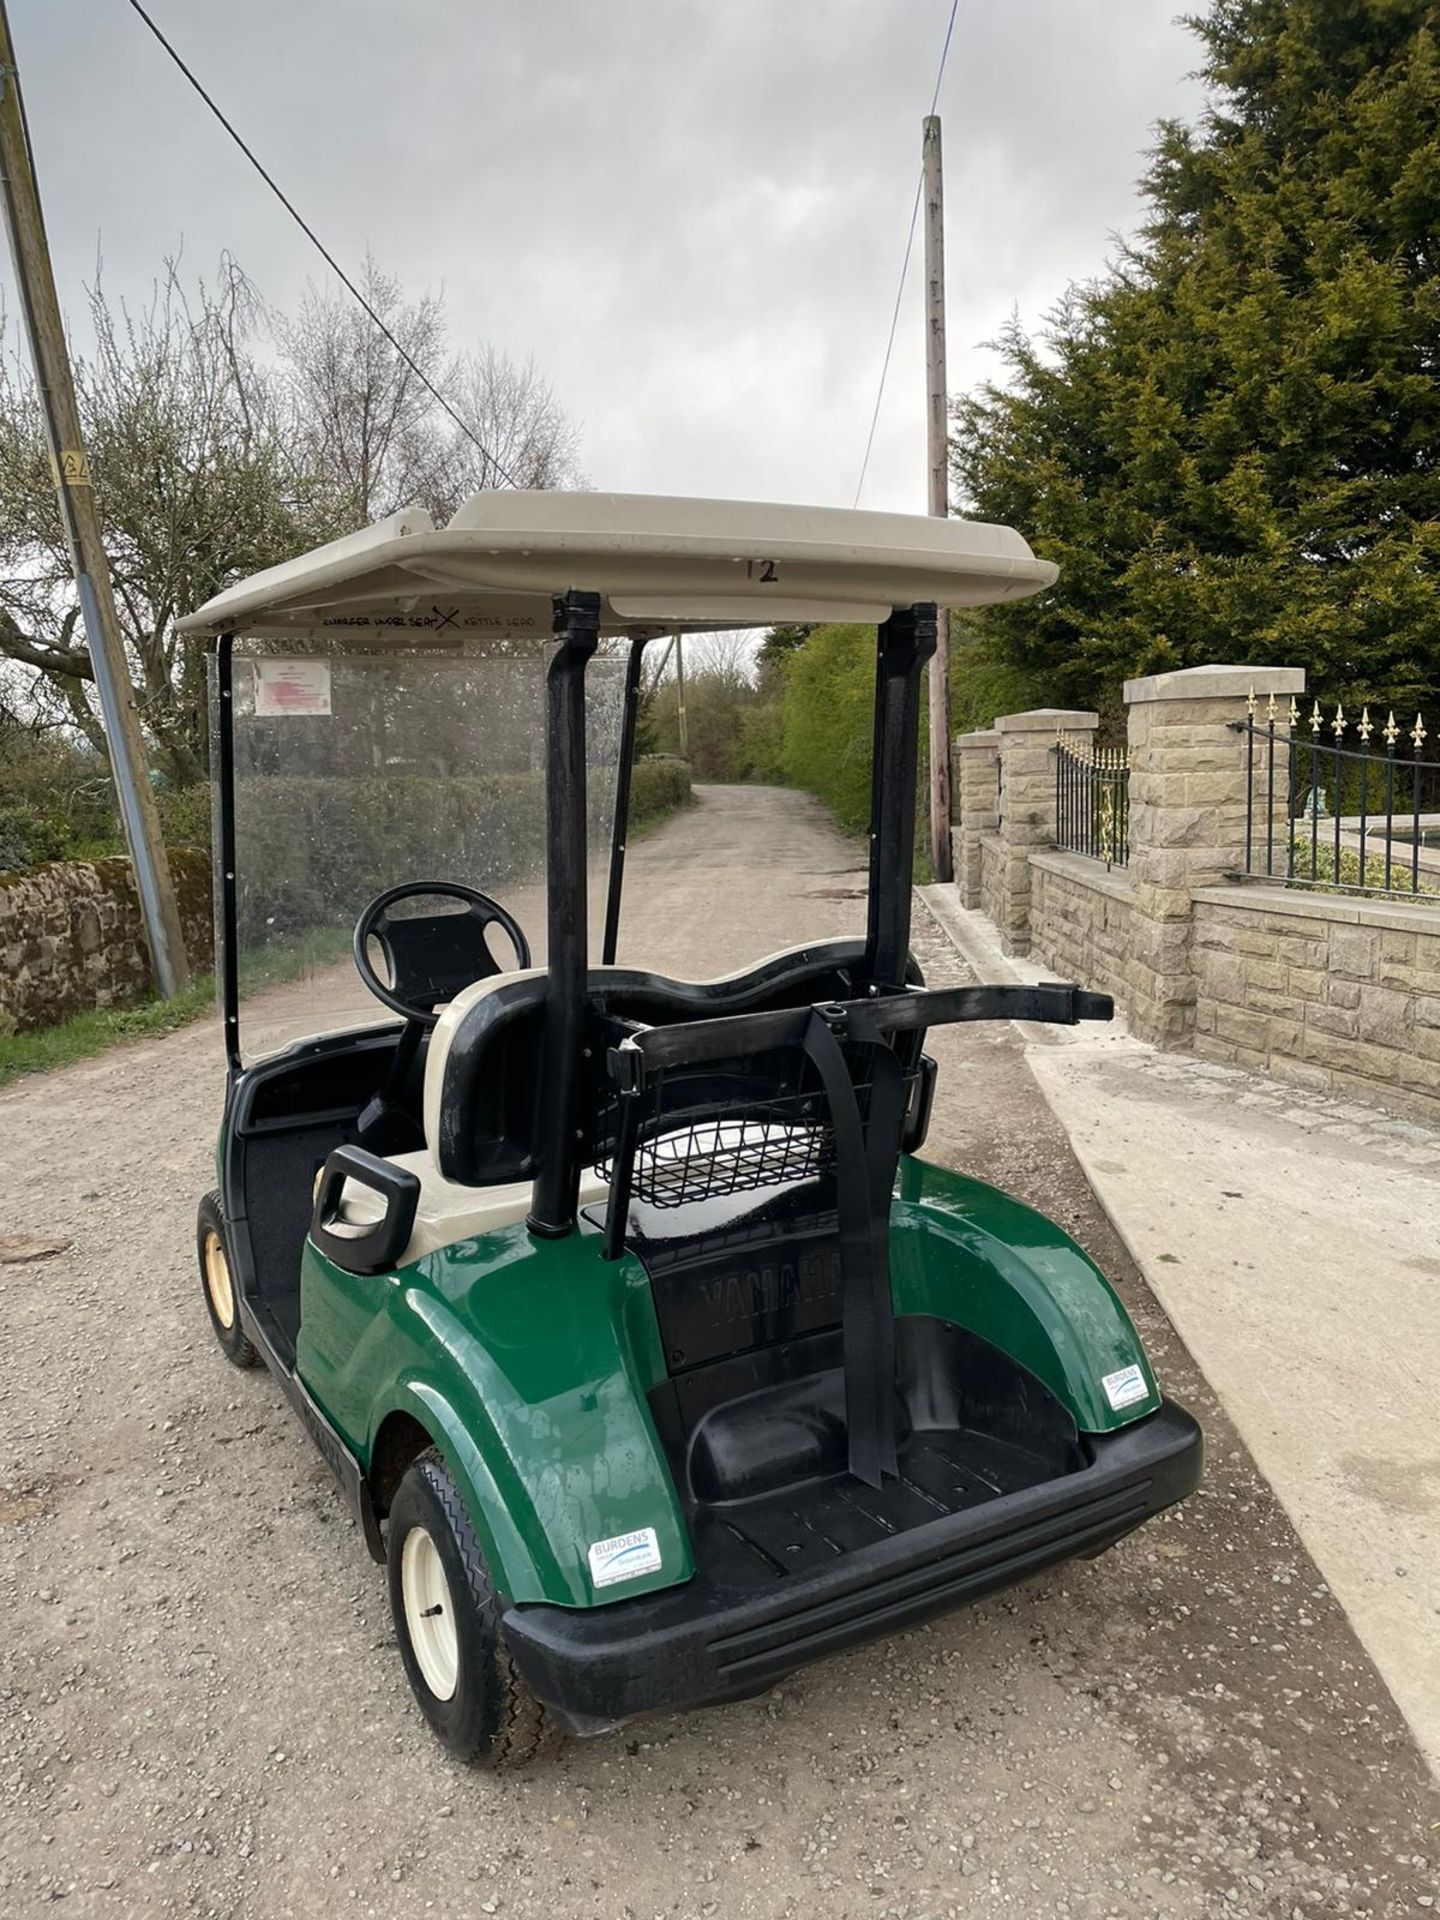 2008 YAMAHA GOLF BUGGY, DRIVE AND WORK OKAY, BATTERY OPERATED, IN GOOD CONDITION *NO VAT* - Image 2 of 5